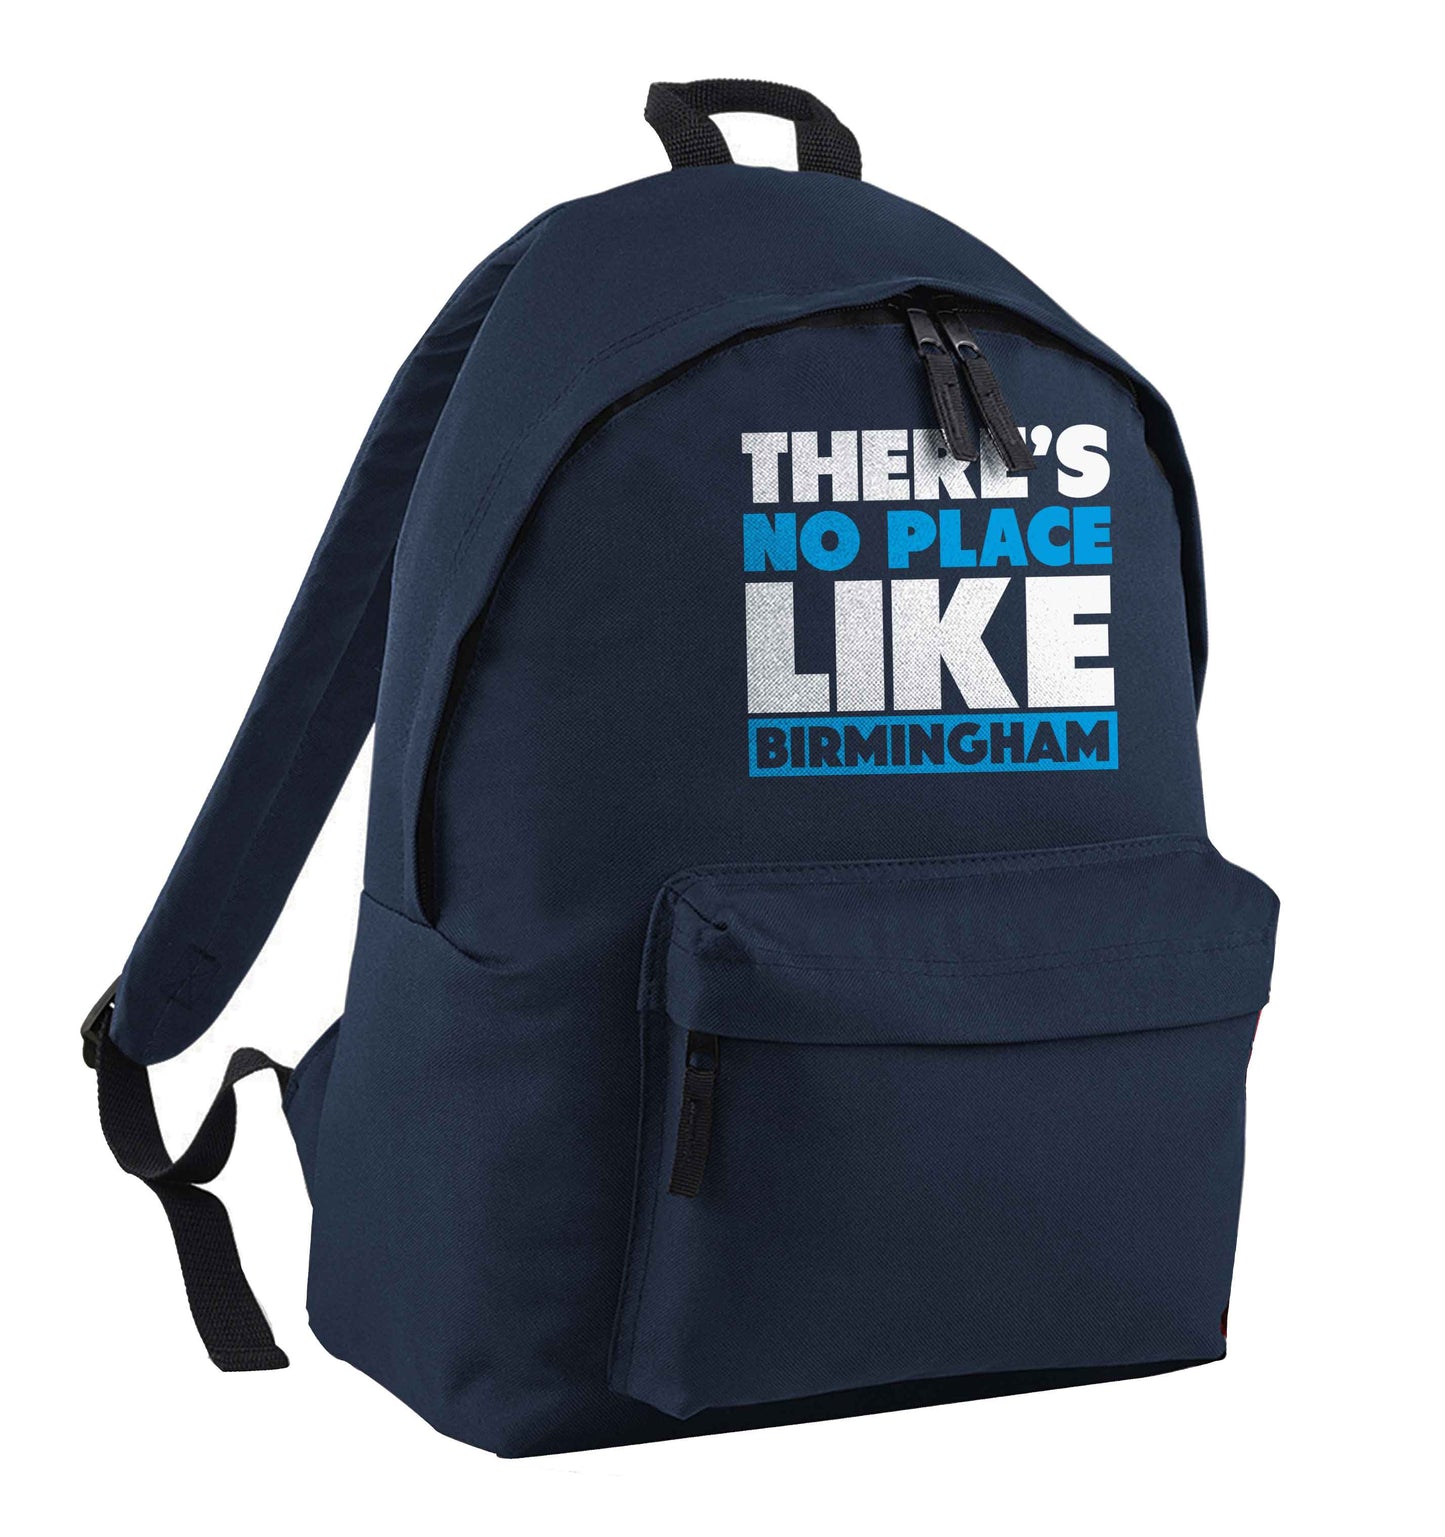 There's no place like Birmingham navy adults backpack